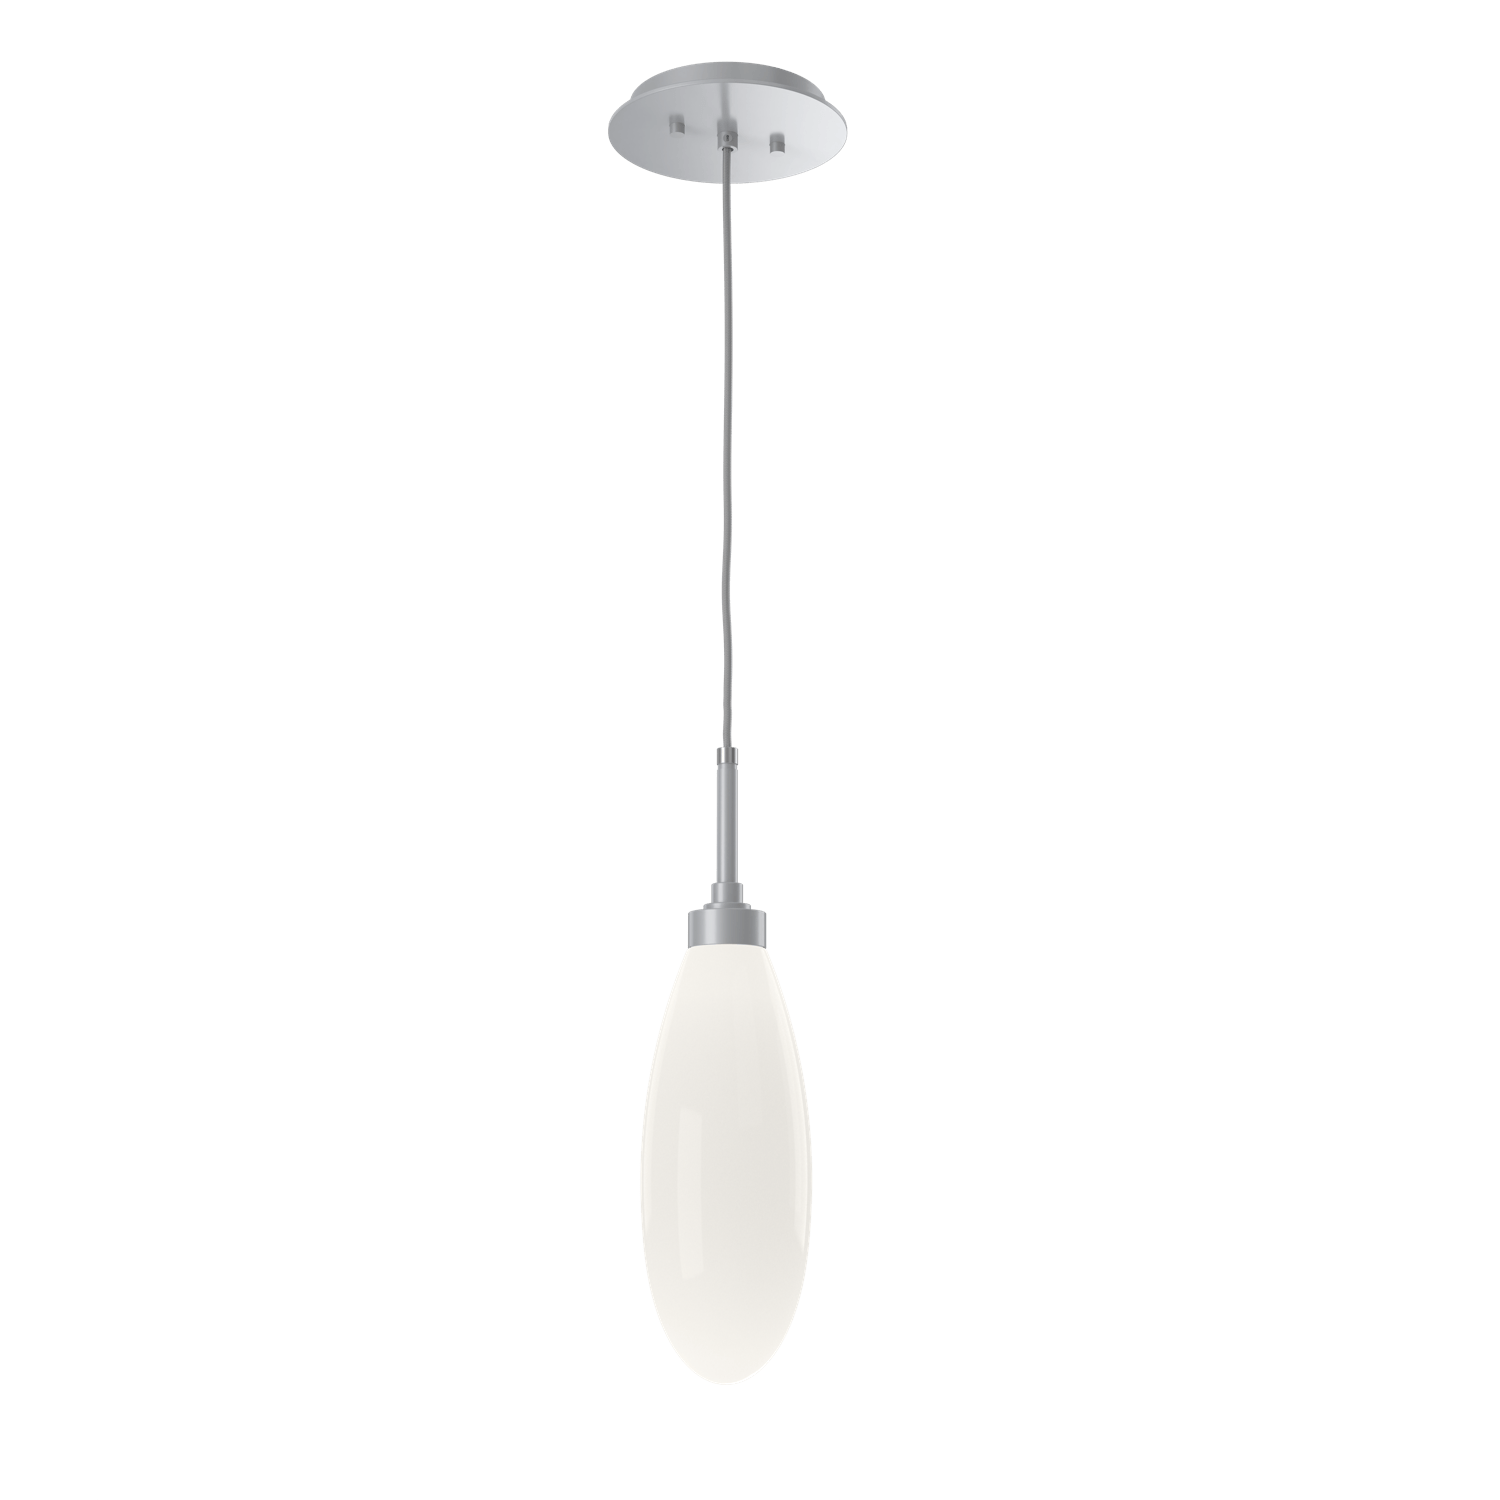 LAB0071-15-CS-WL-LL-Hammerton-Studio-Fiori-pendant-light-with-classic-silver-finish-and-opal-white-glass-shades-and-LED-lamping